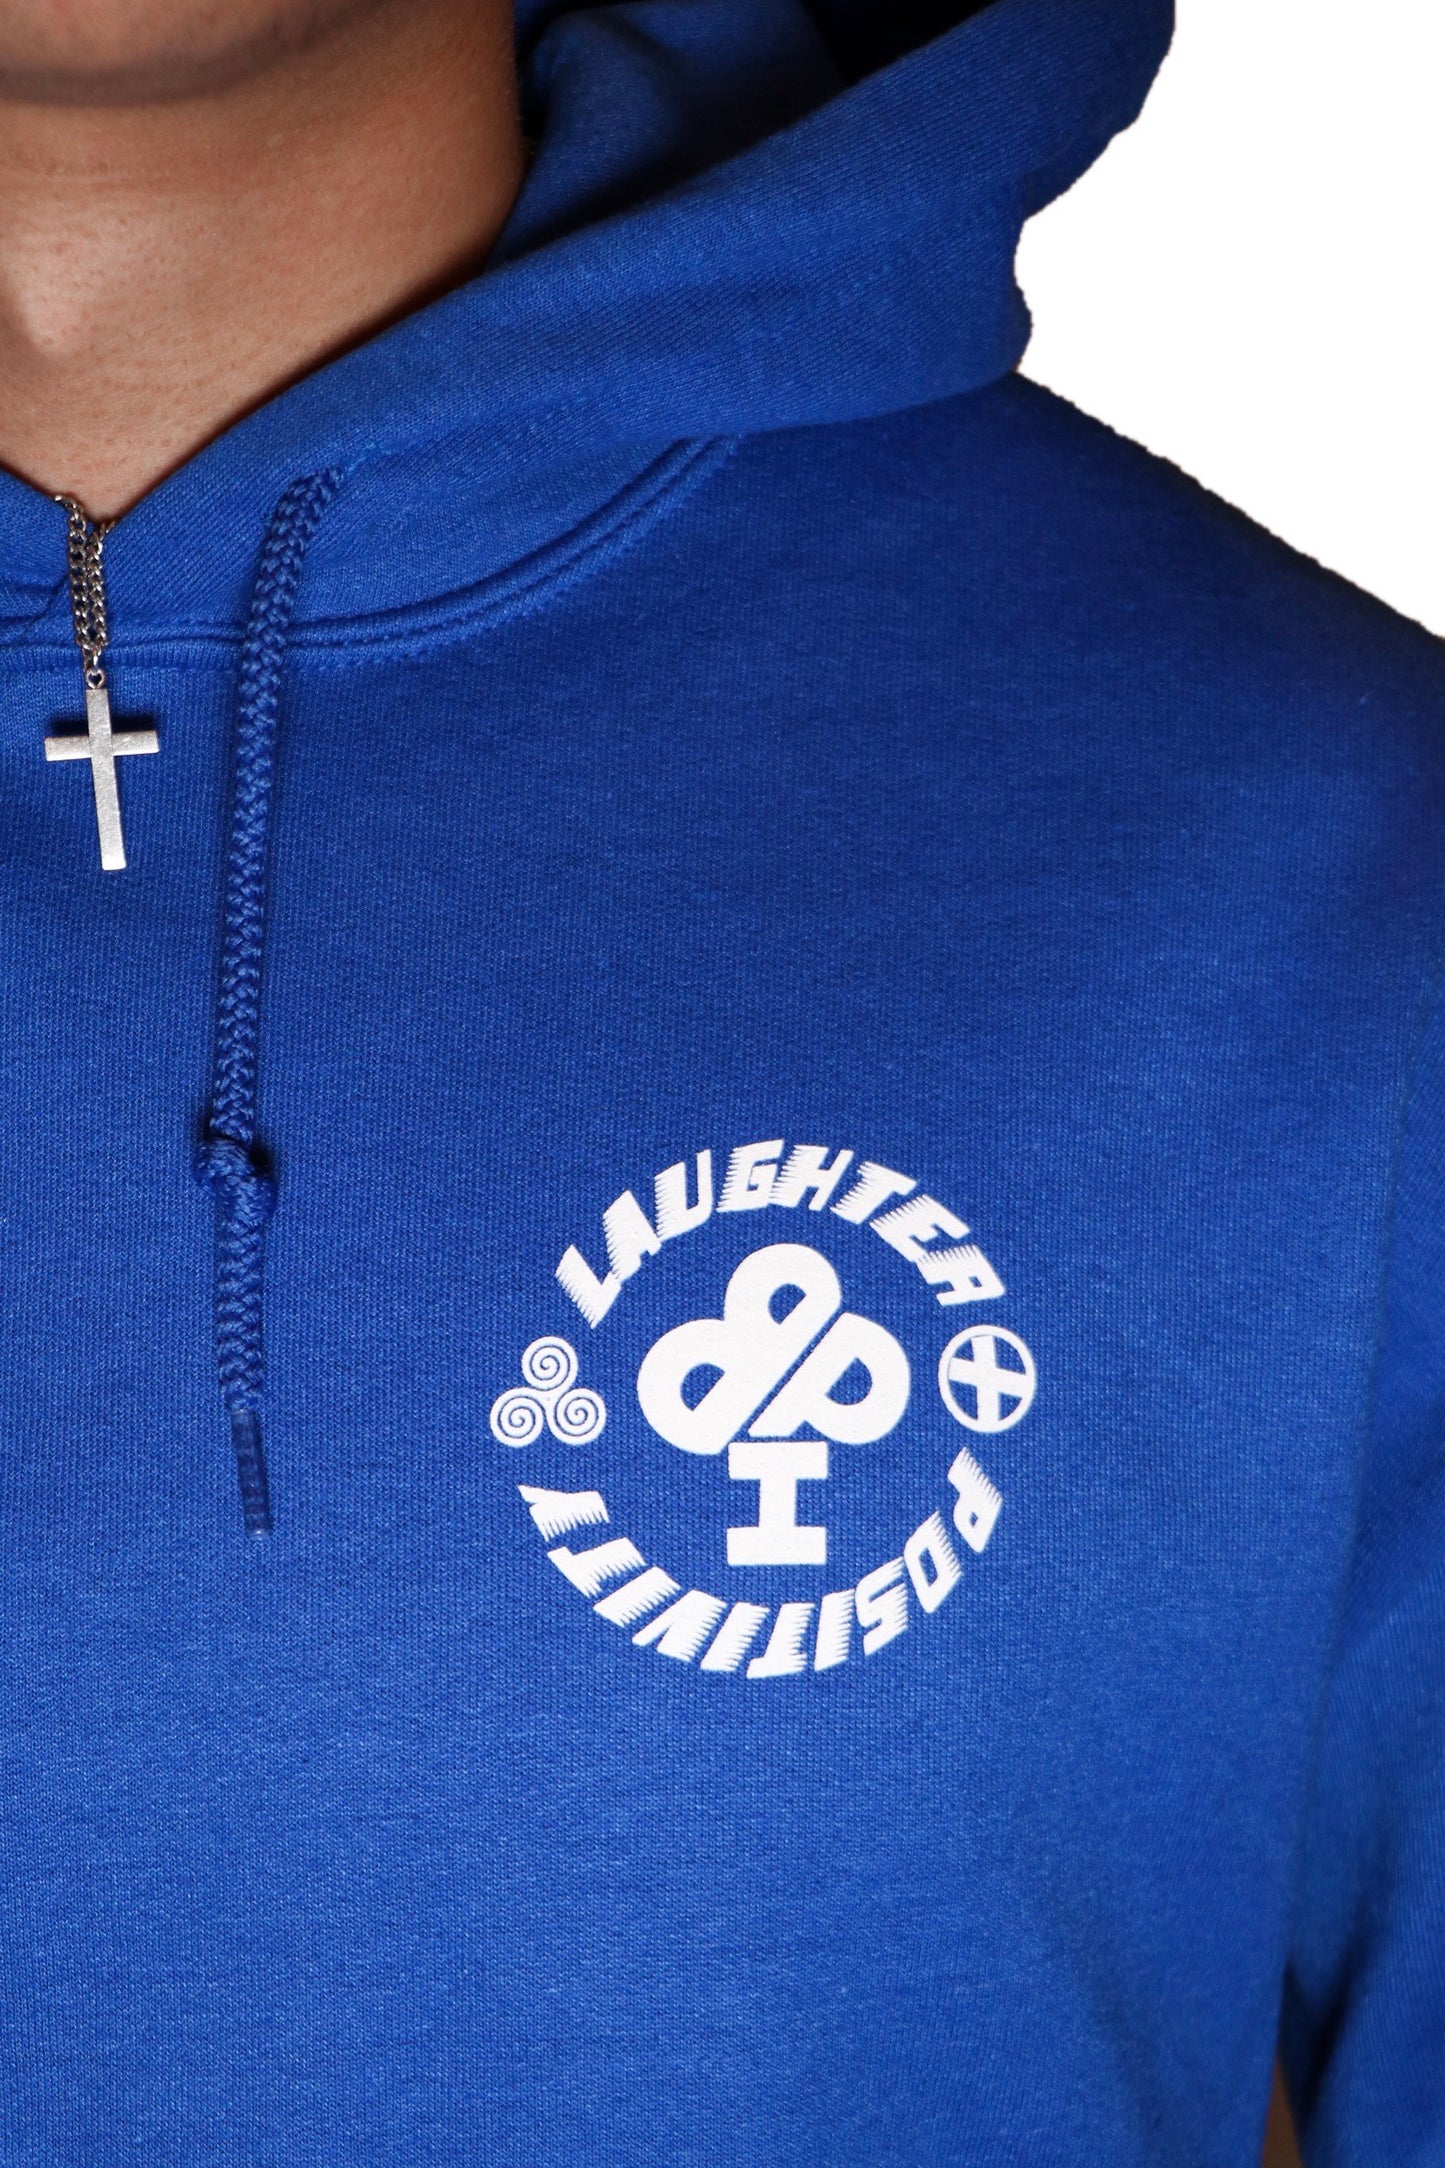 Laughter and Positivity Cotton Hoodie in Blue, Green or White